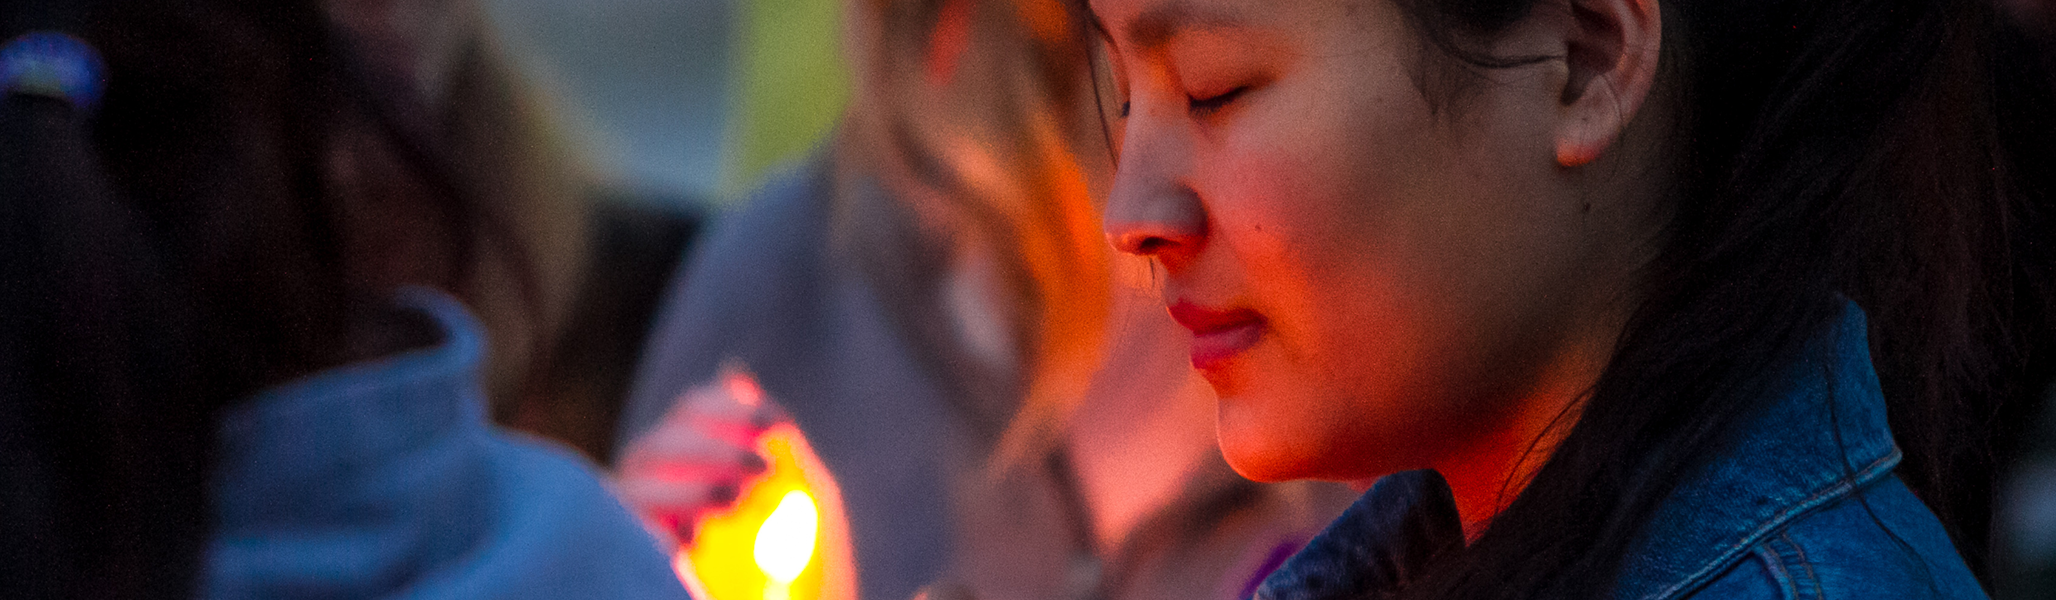 A student attends a candlelight vigil on campus